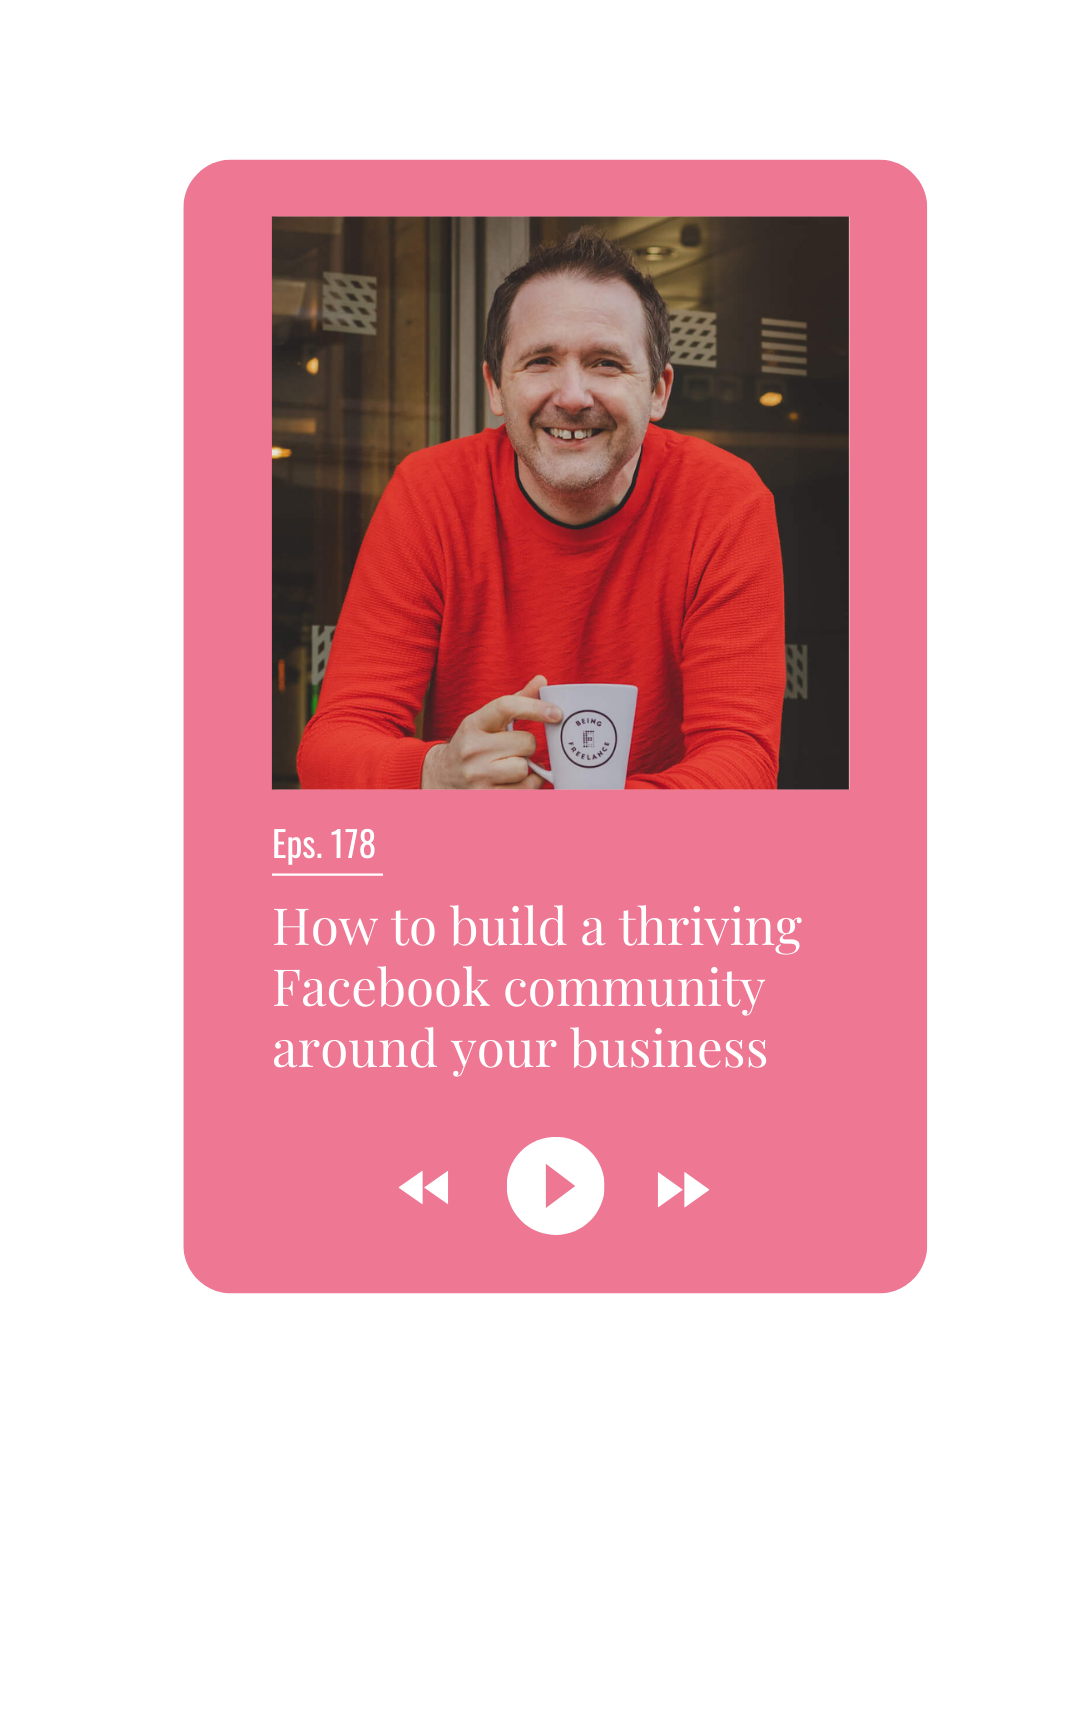 How to build a thriving Facebook community around your business